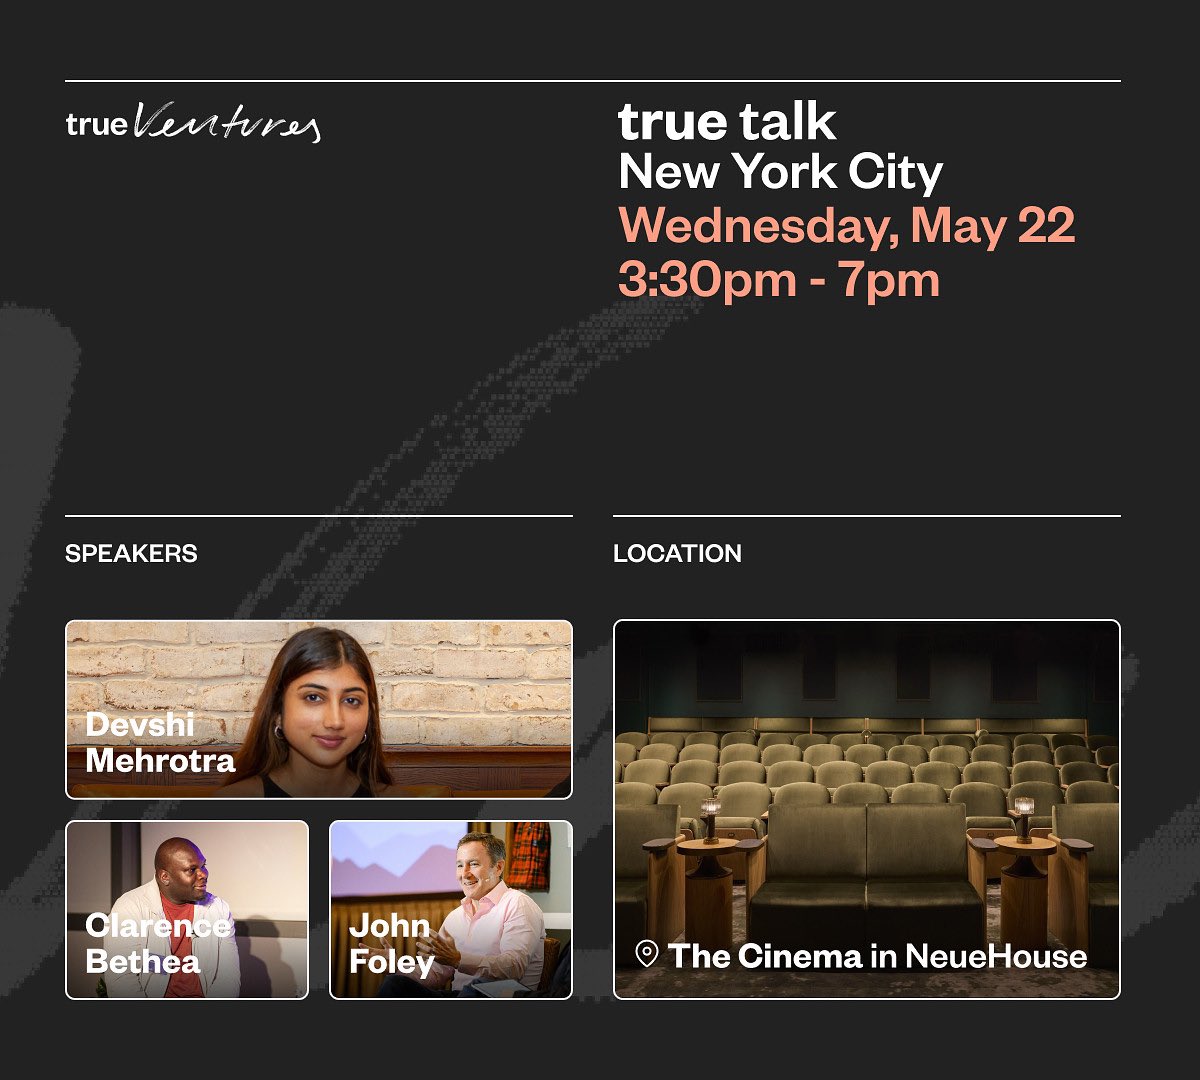 NYC, we are looking forward to seeing you at our next episode of #truetalk! If you’re in the area and are an entrepreneur, creator or just interested in the ups and downs of startups, come join us! Register here: trueventures.typeform.com/to/H8vBqz1h